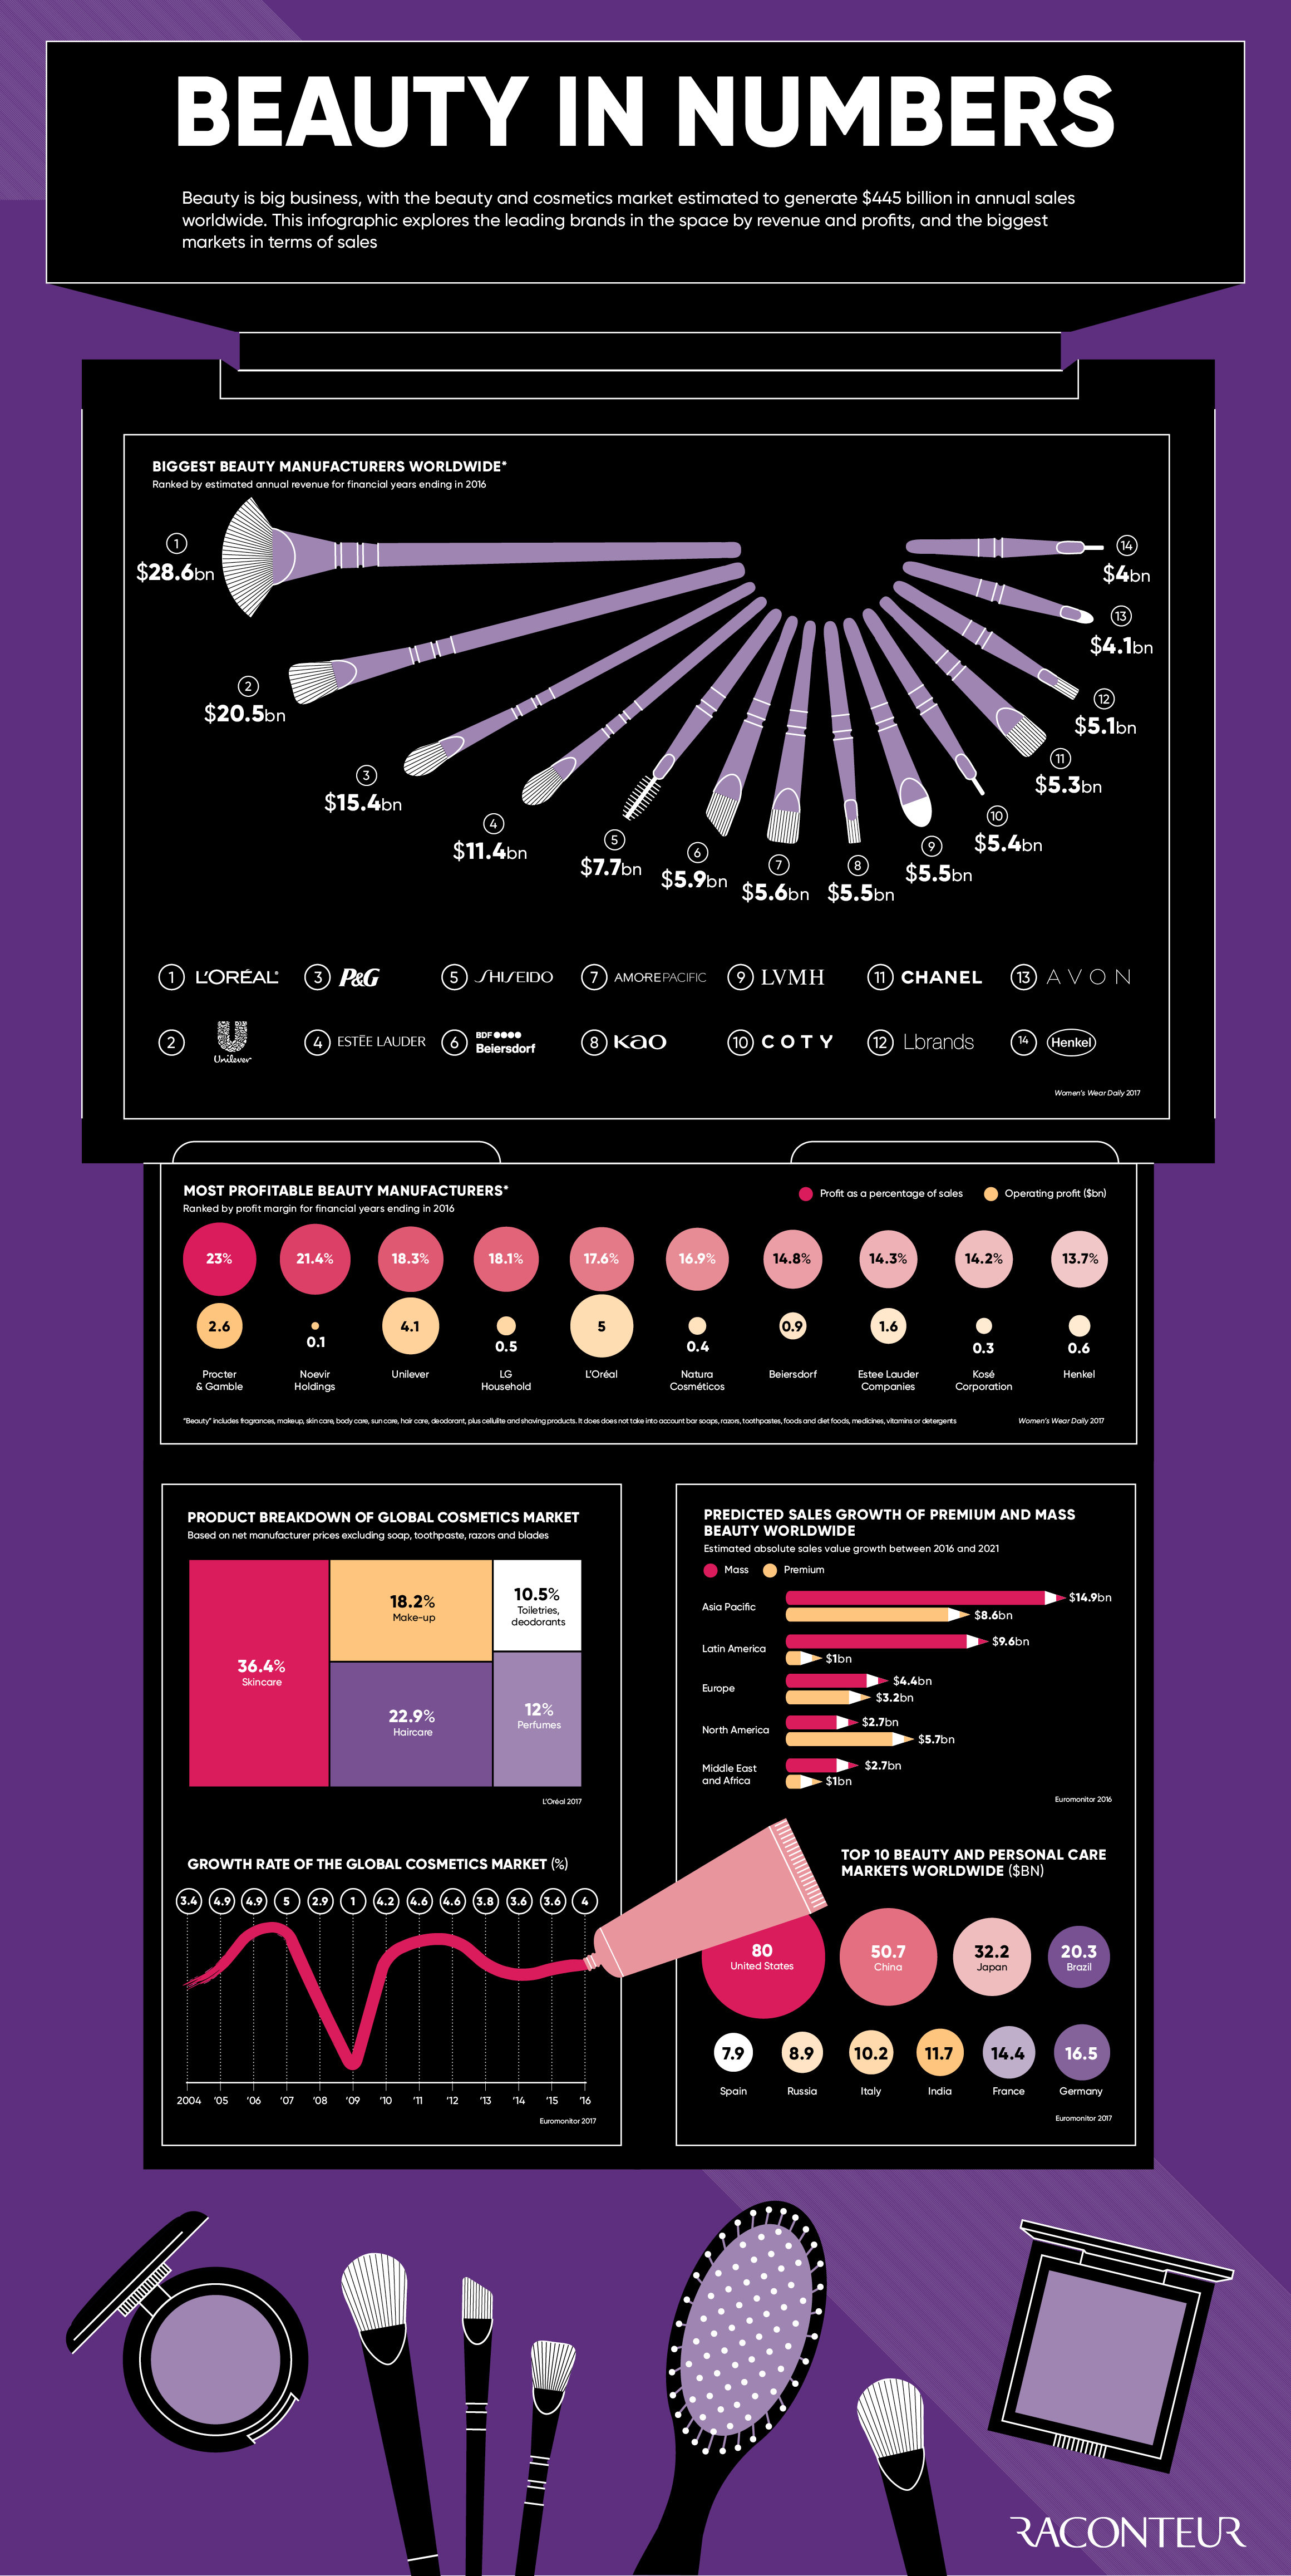 Beauty in numbers infographic